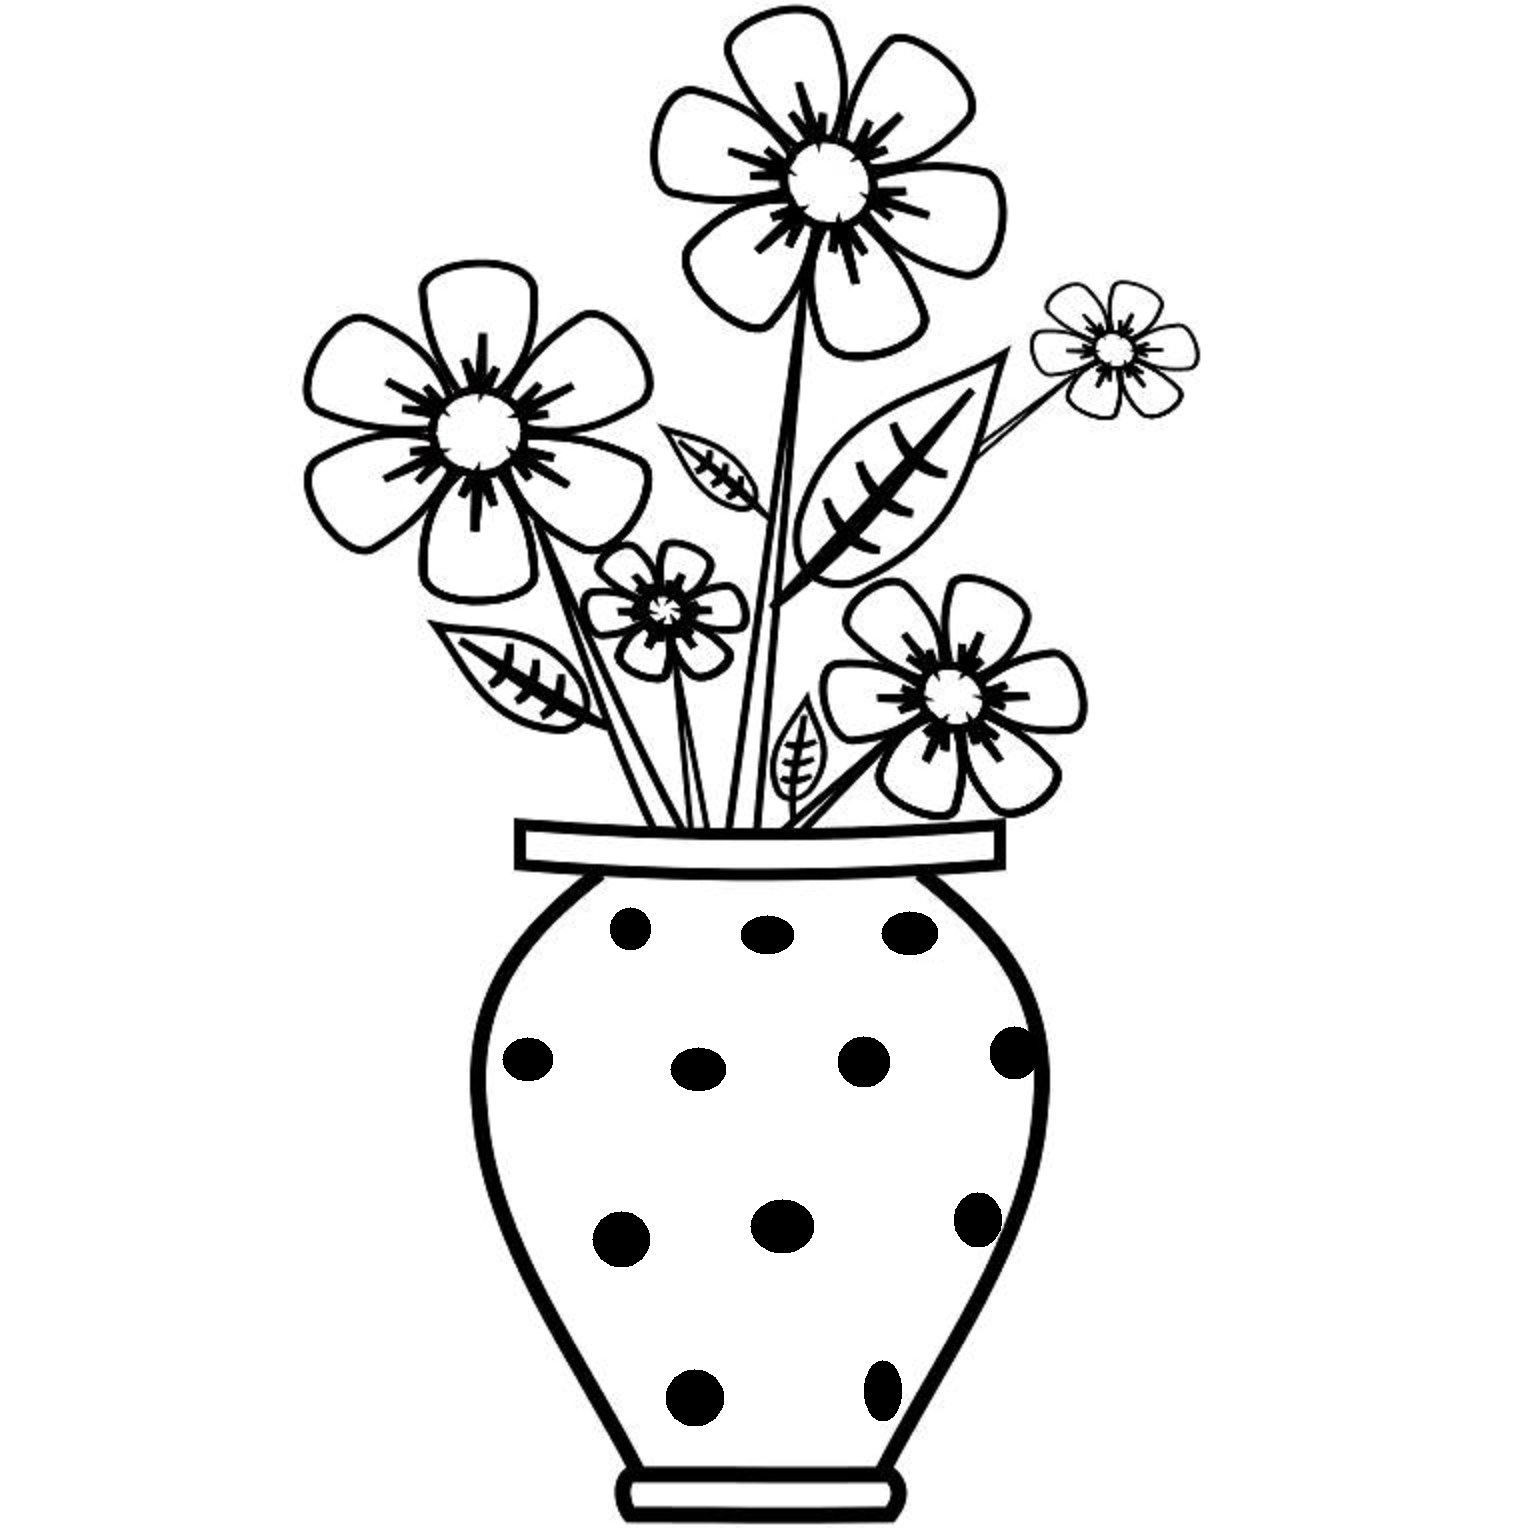 Creative Flower In Pot Drawing Sketch with simple drawing